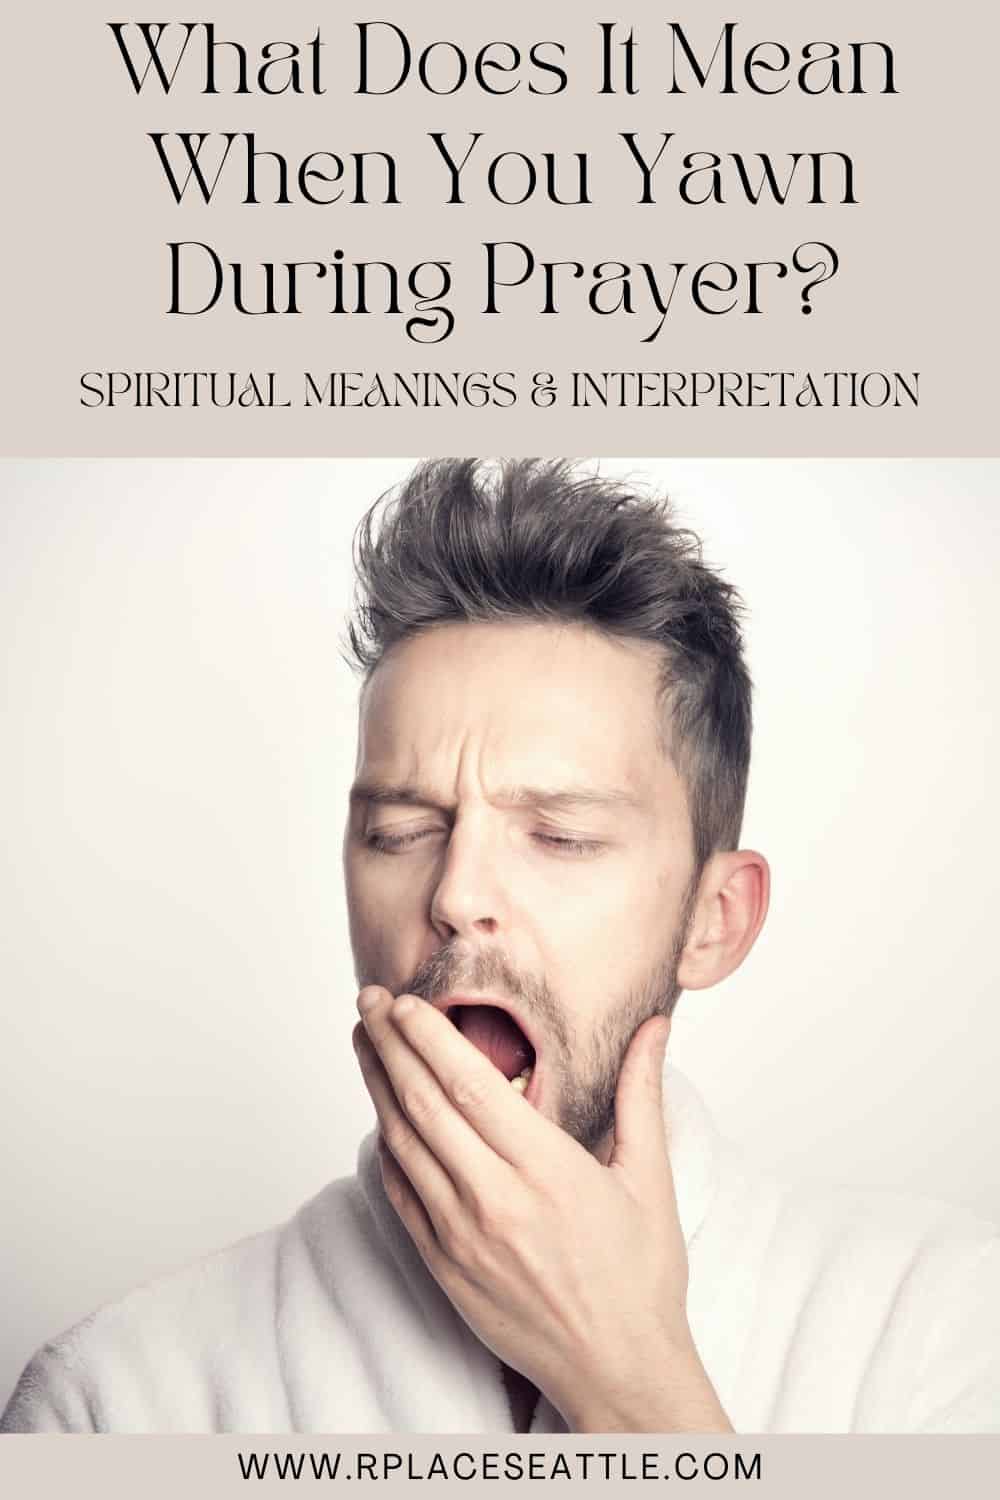 What Does It Mean When You Yawn During Prayer (Spiritual Meanings & Interpretation)